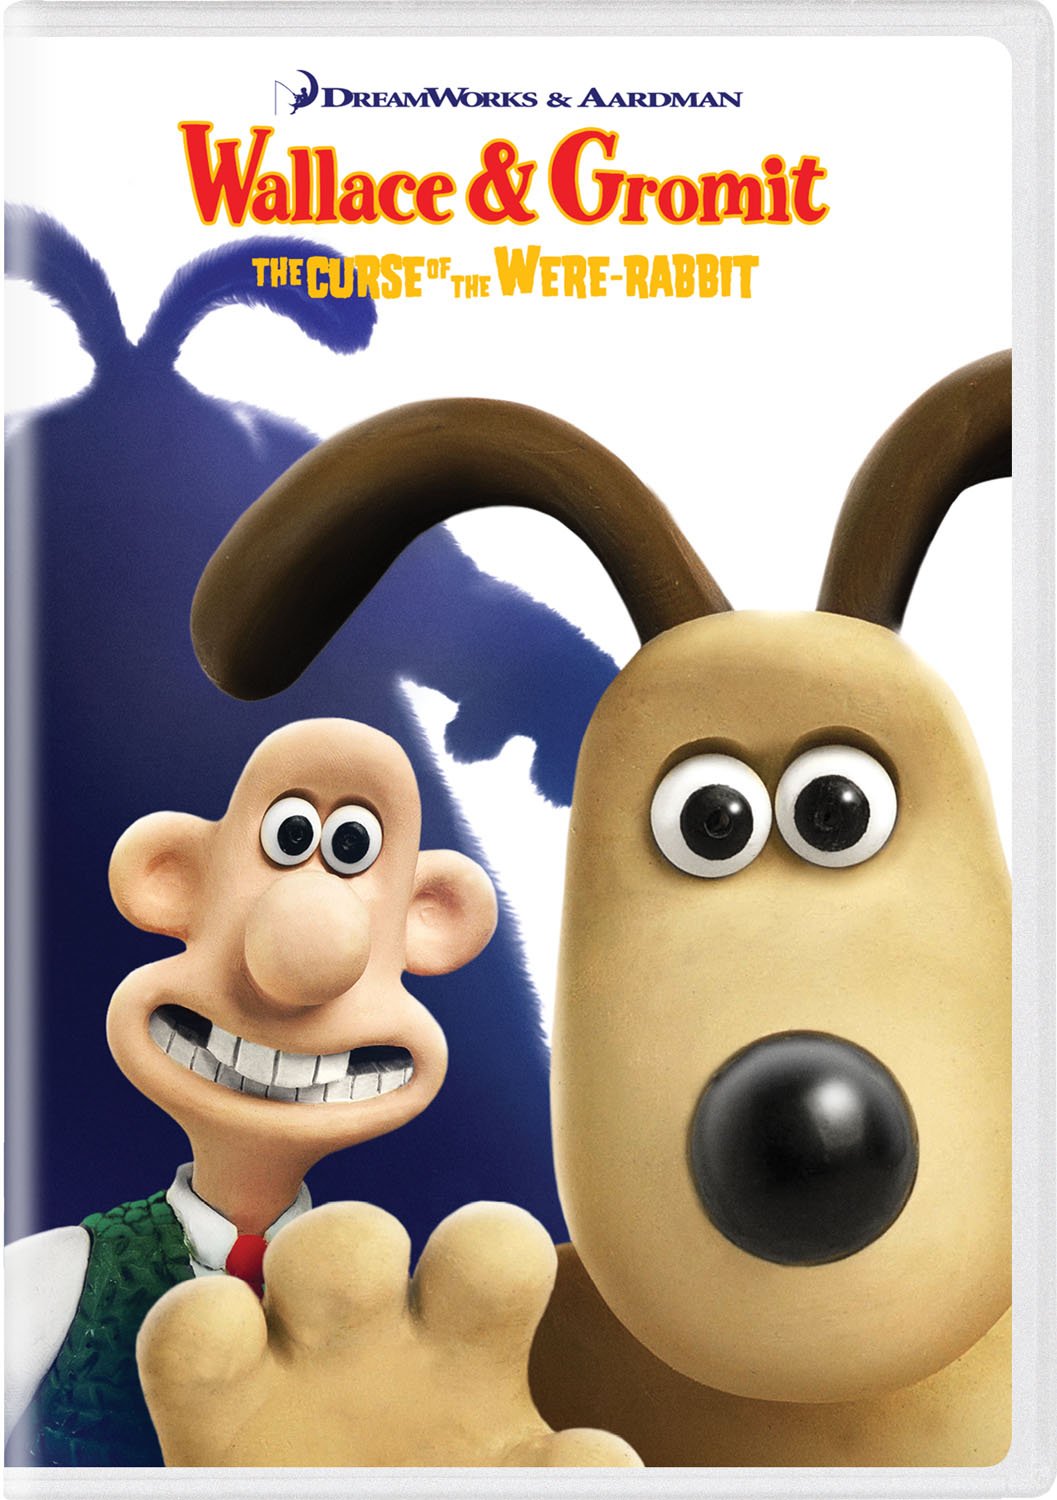 See Wallace & Gromit The Curse of the Were Rabbit in Library Catalog